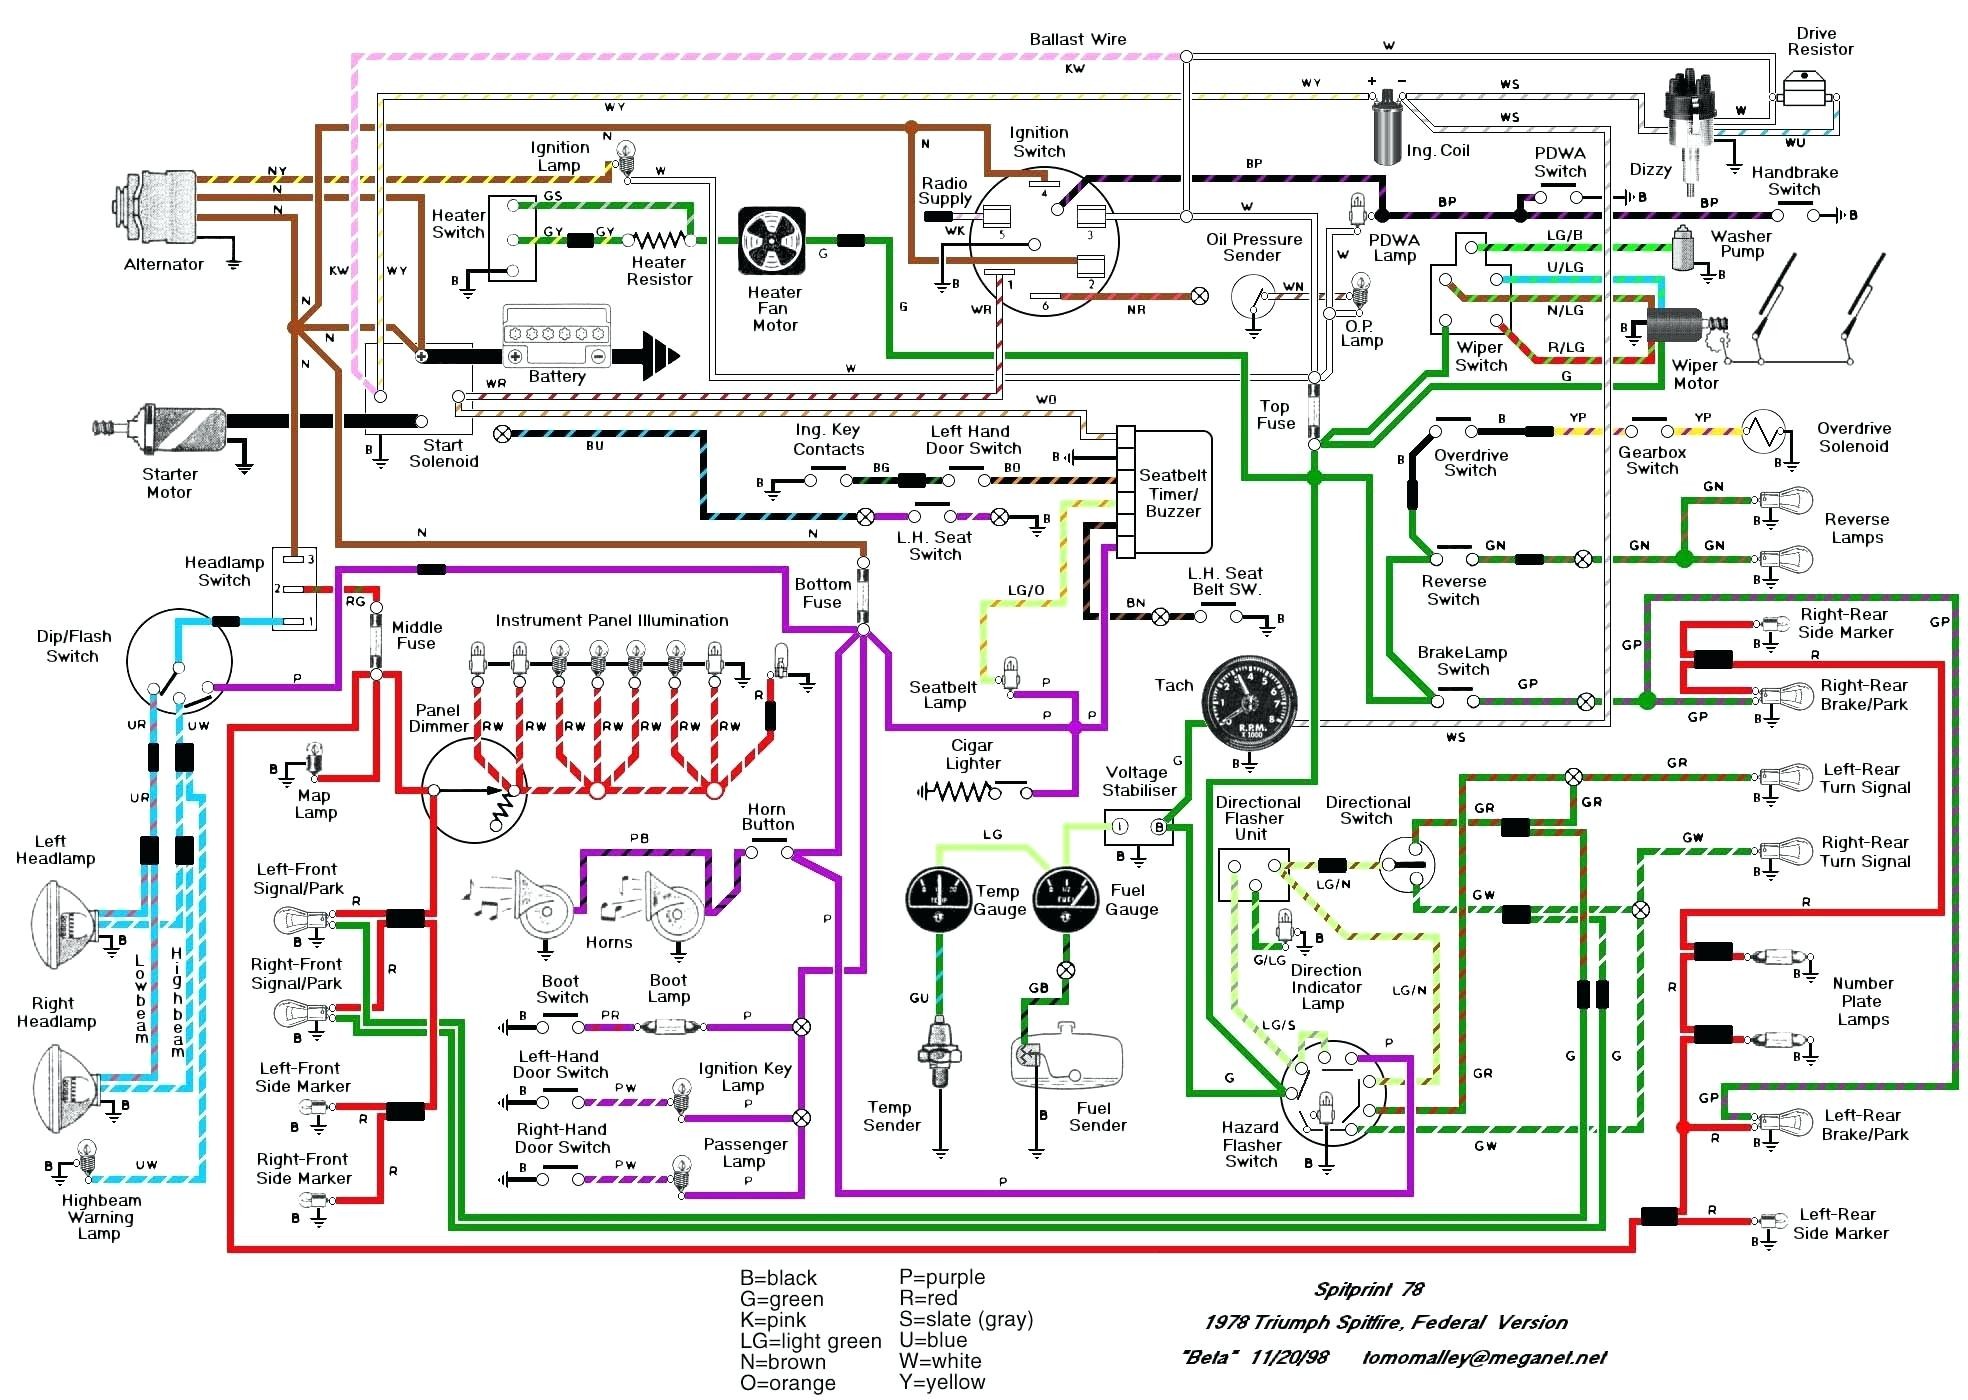 Full Size of Wiring Diagram Software Open Source Data Flow Symbols Library Basic Flowchart Design Car